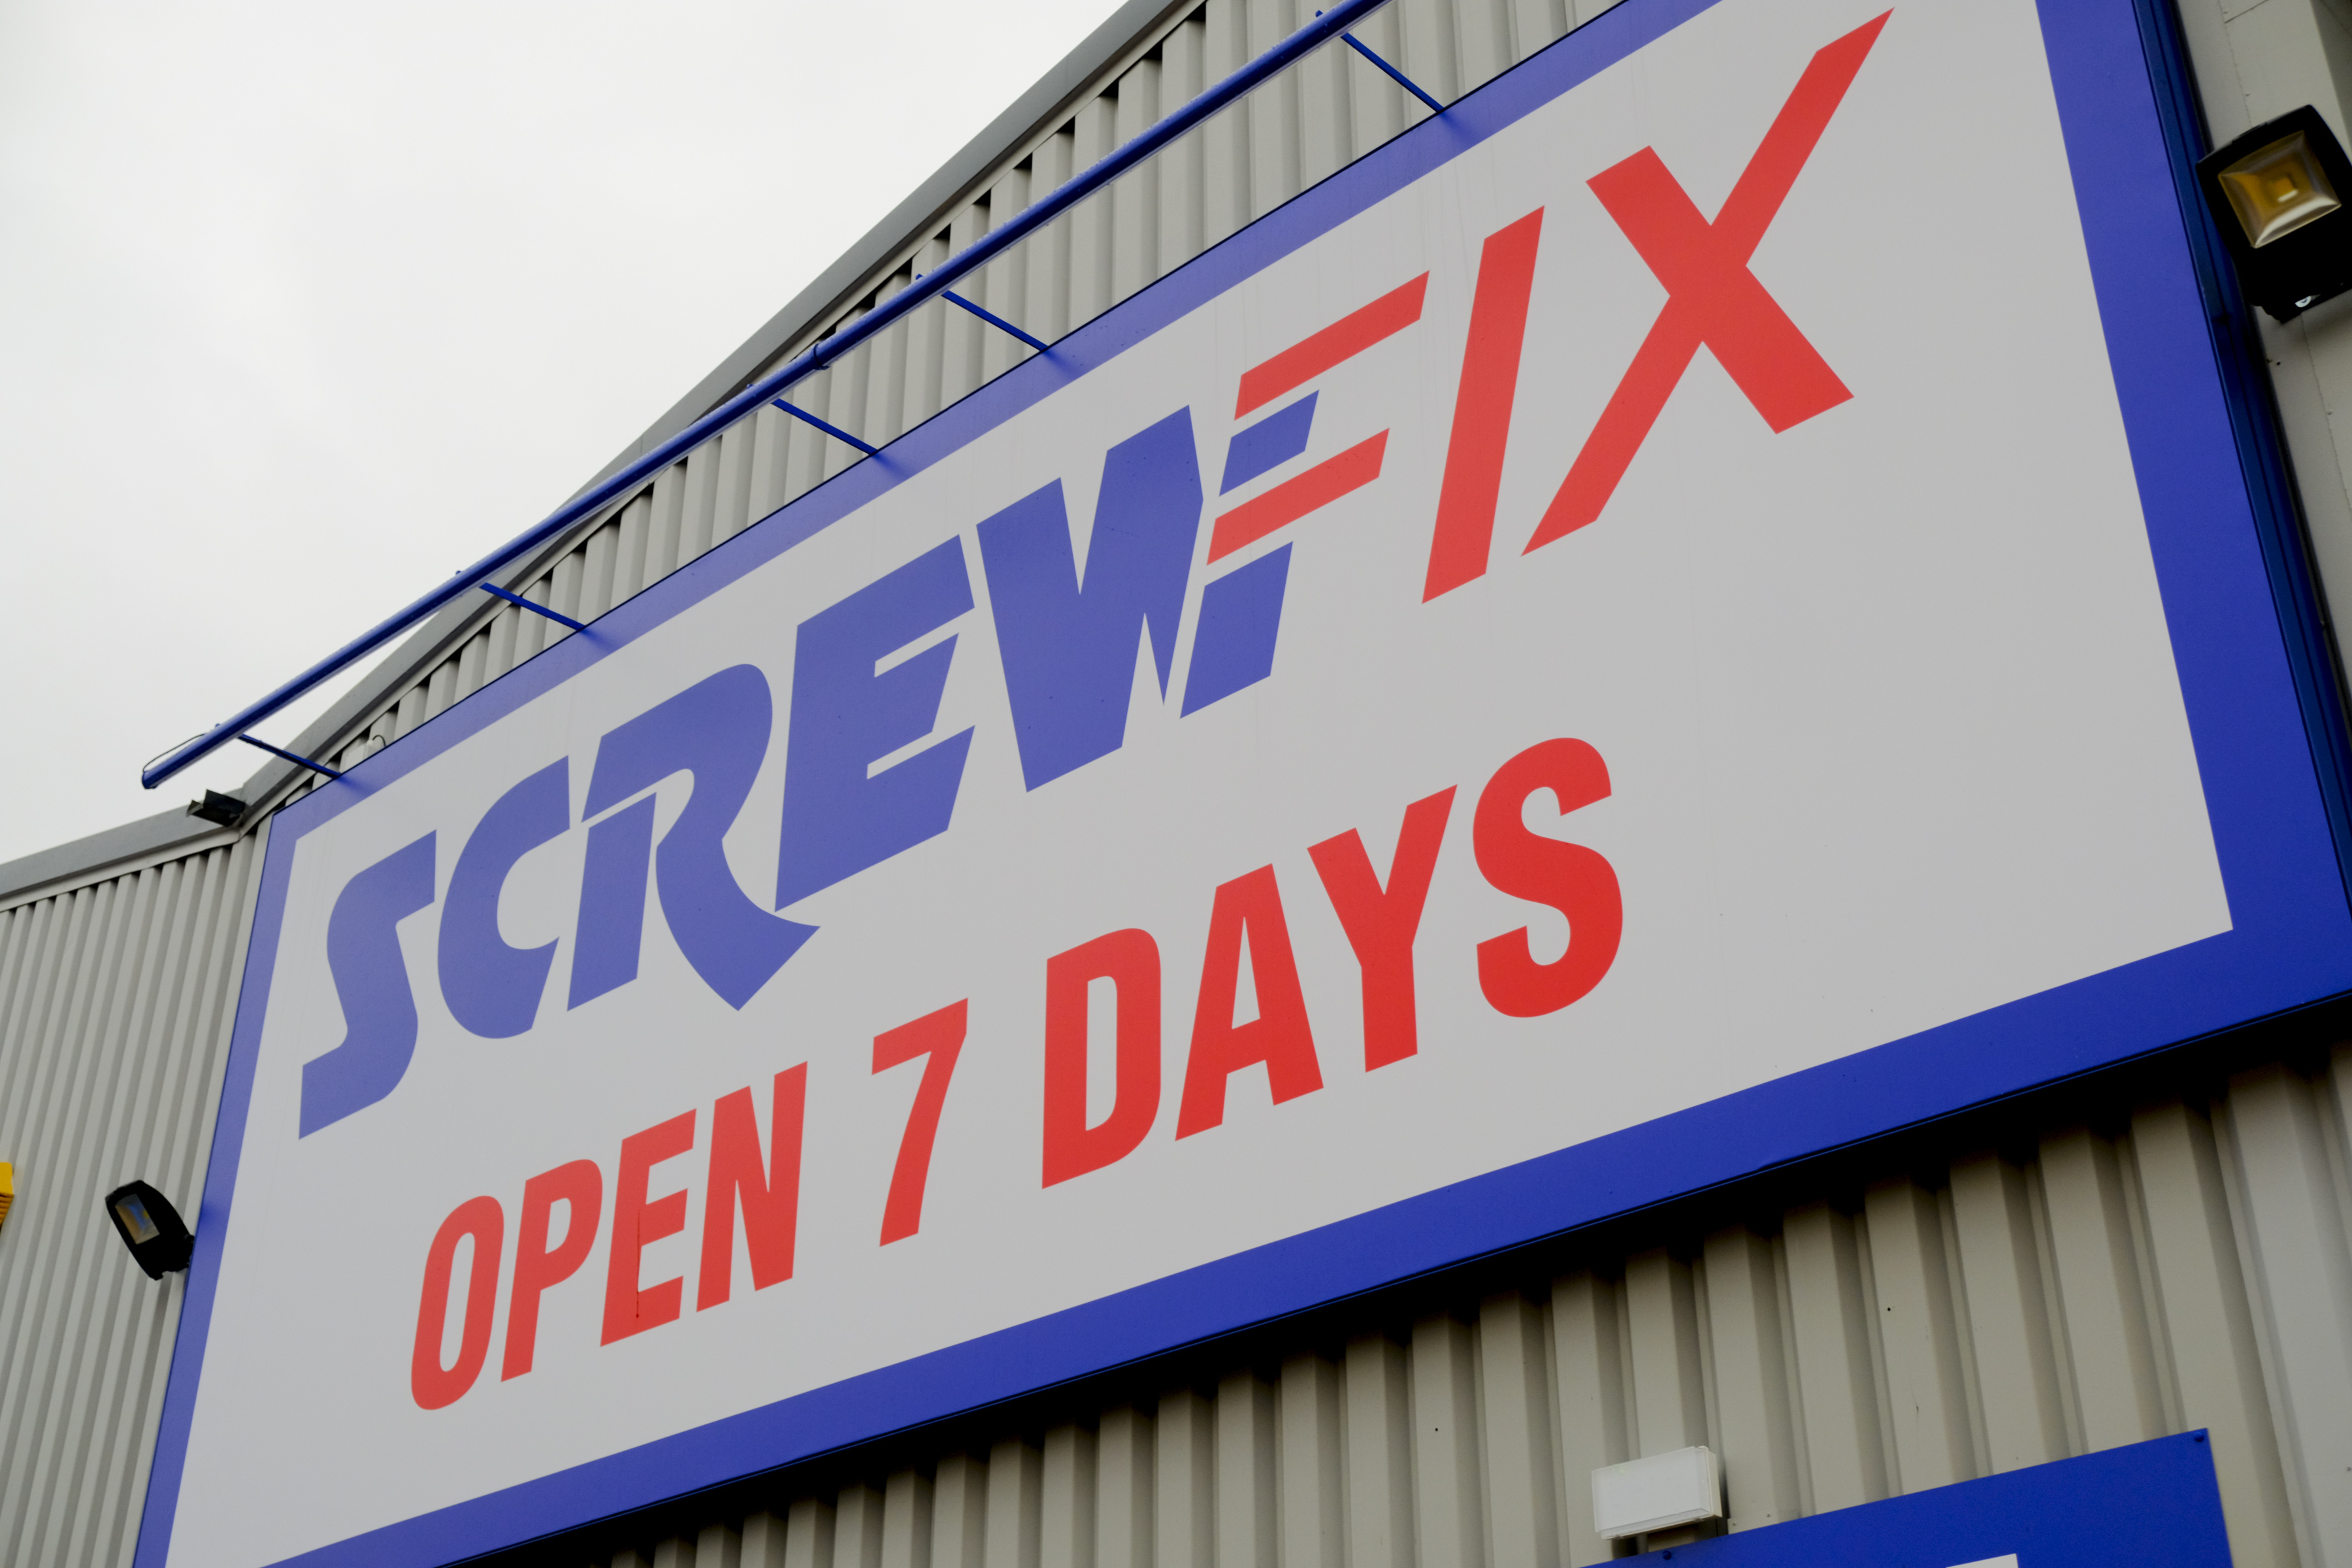 Epping to welcome new Screwfix store